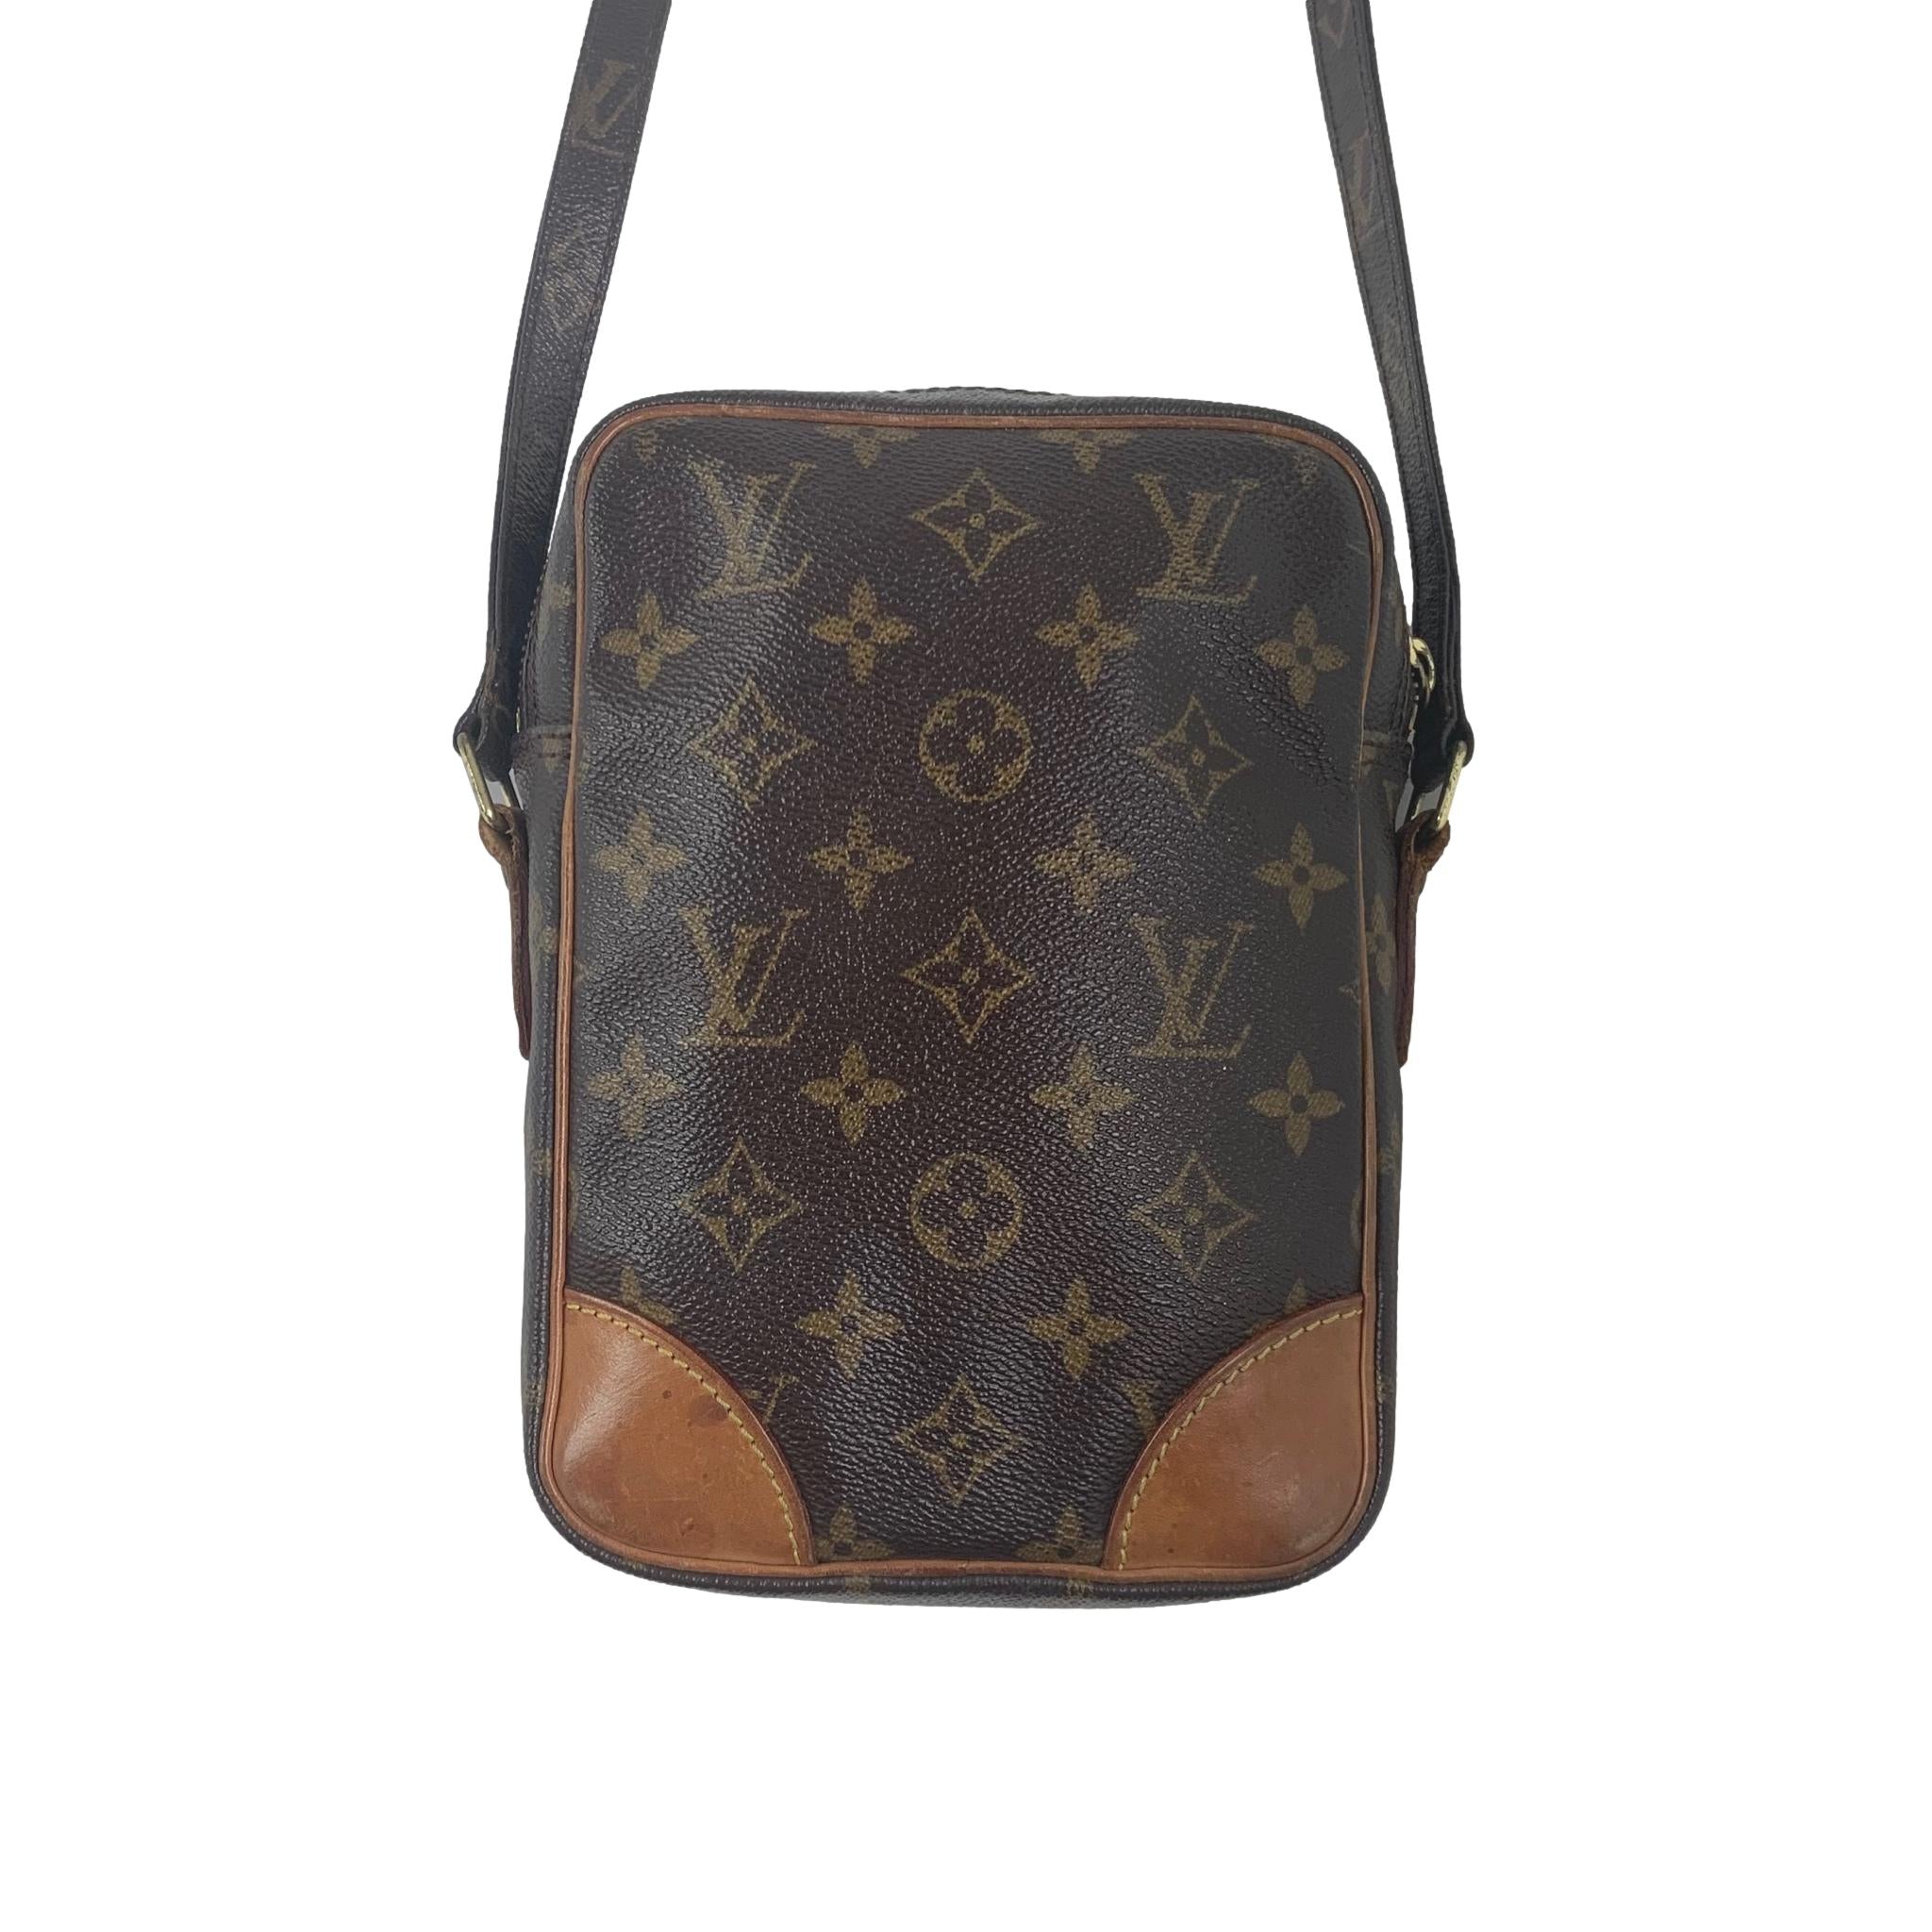 Louis Vuitton Danube PM Shoulder Bag, in blue Epi calf leather and black  stitching with golden brass hardware, opening to a black leather interior  wit sold at auction on 18th July